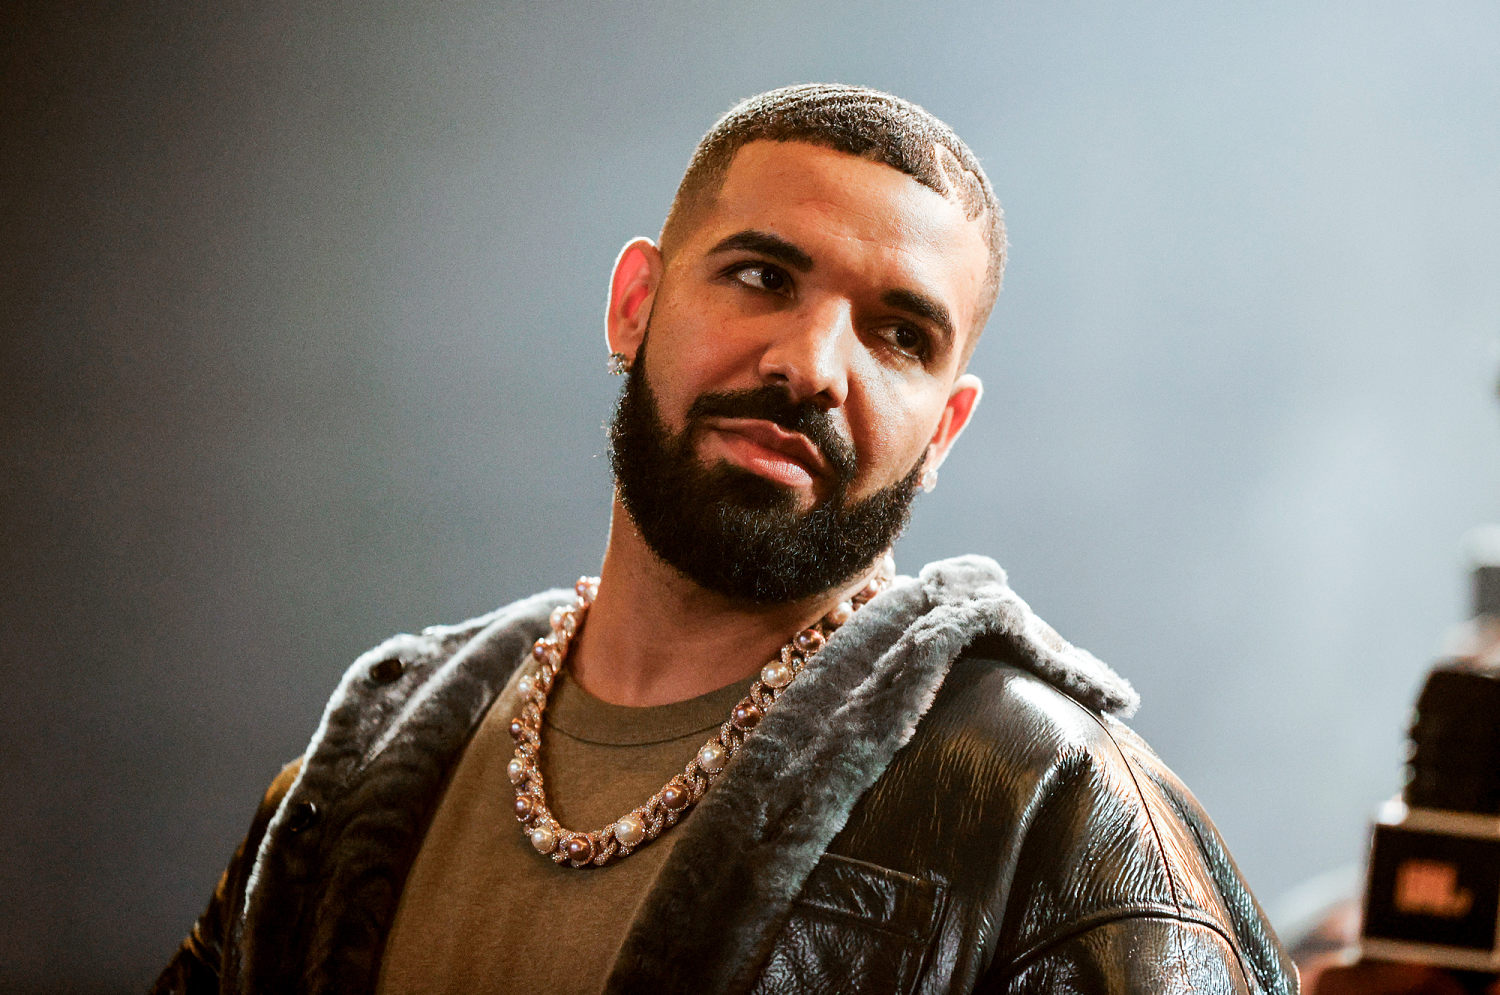 3rd trespassing reported at Drake’s mansion as man from previous incident came back for bike